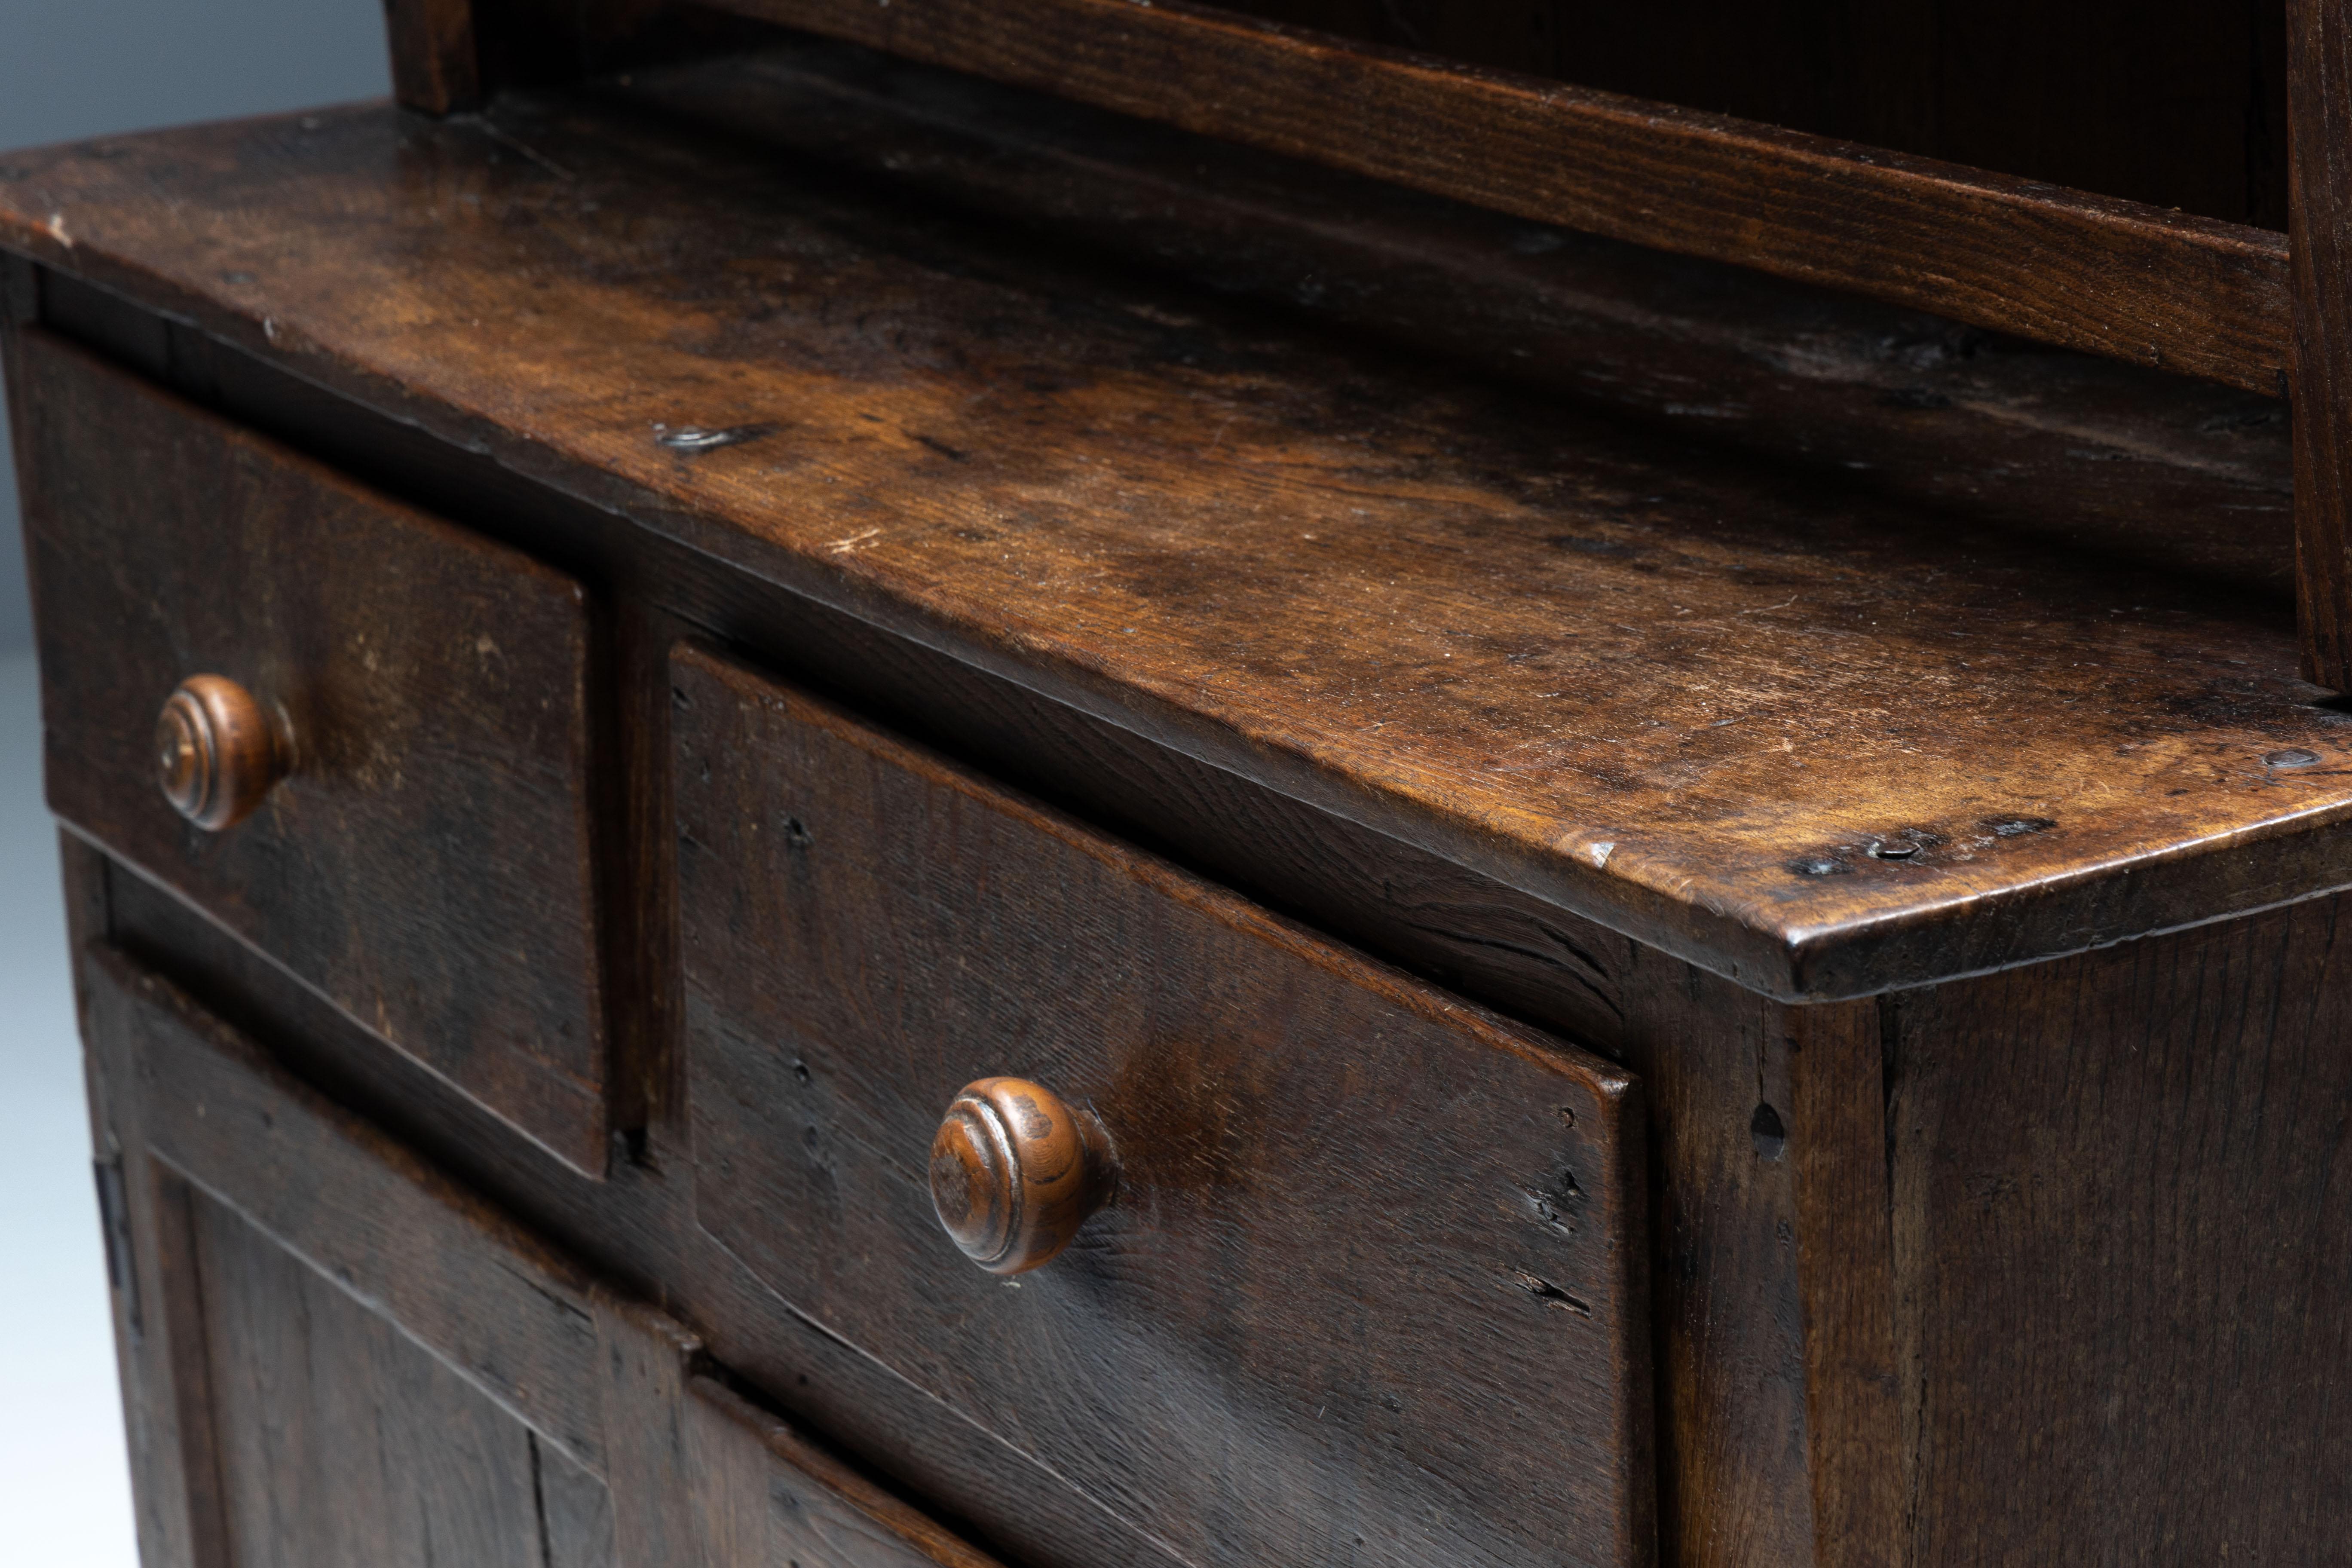 Rustic Travail Populaire Cupboard, France, Early 19th Century For Sale 10